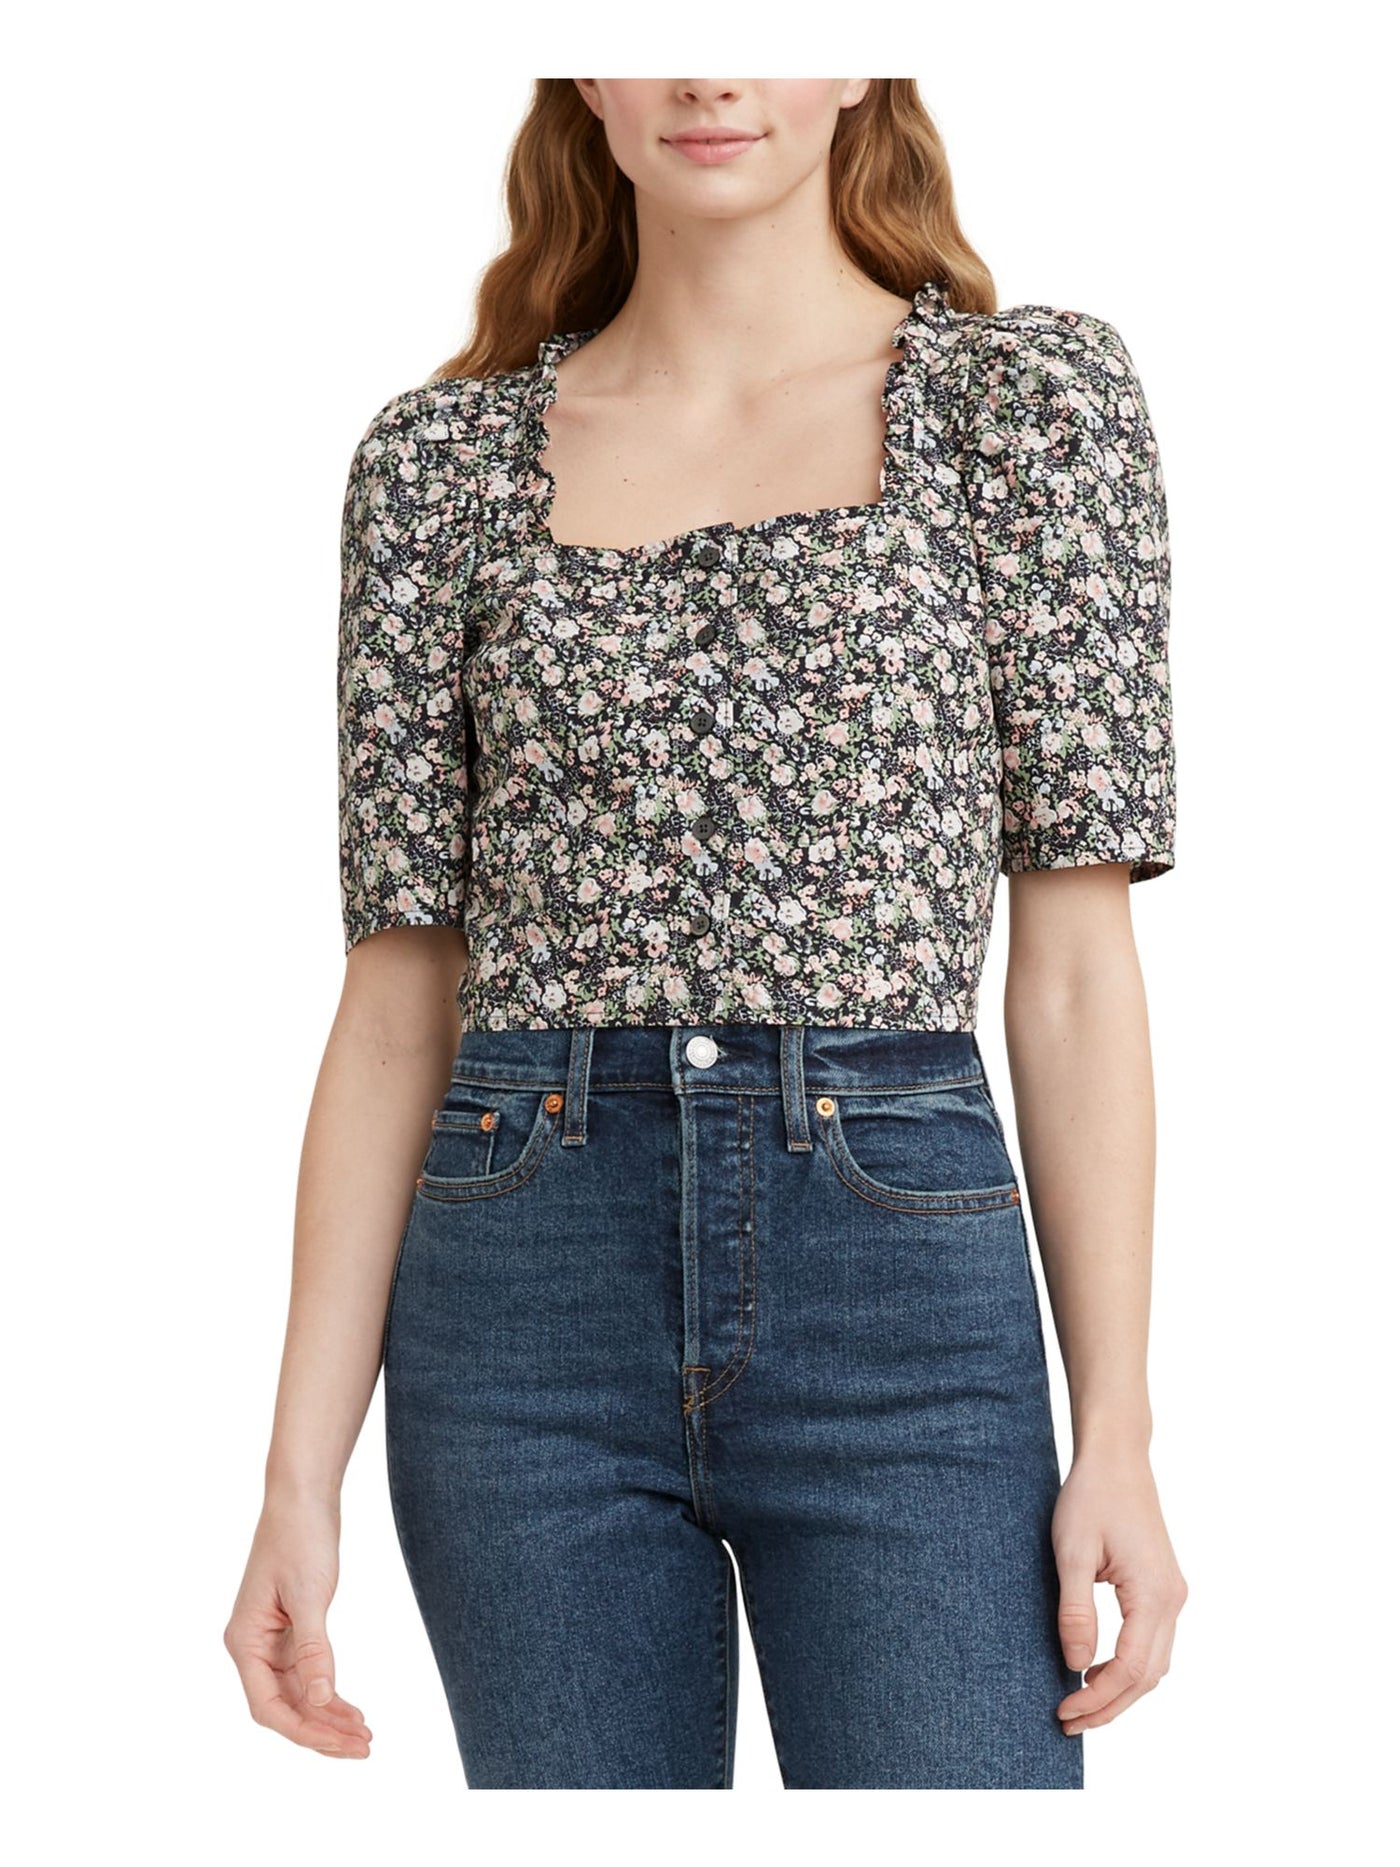 LEVI'S Womens Black Ruffled Buttoned Elbow-puff-sleeves Floral Square Neck Blouse XS